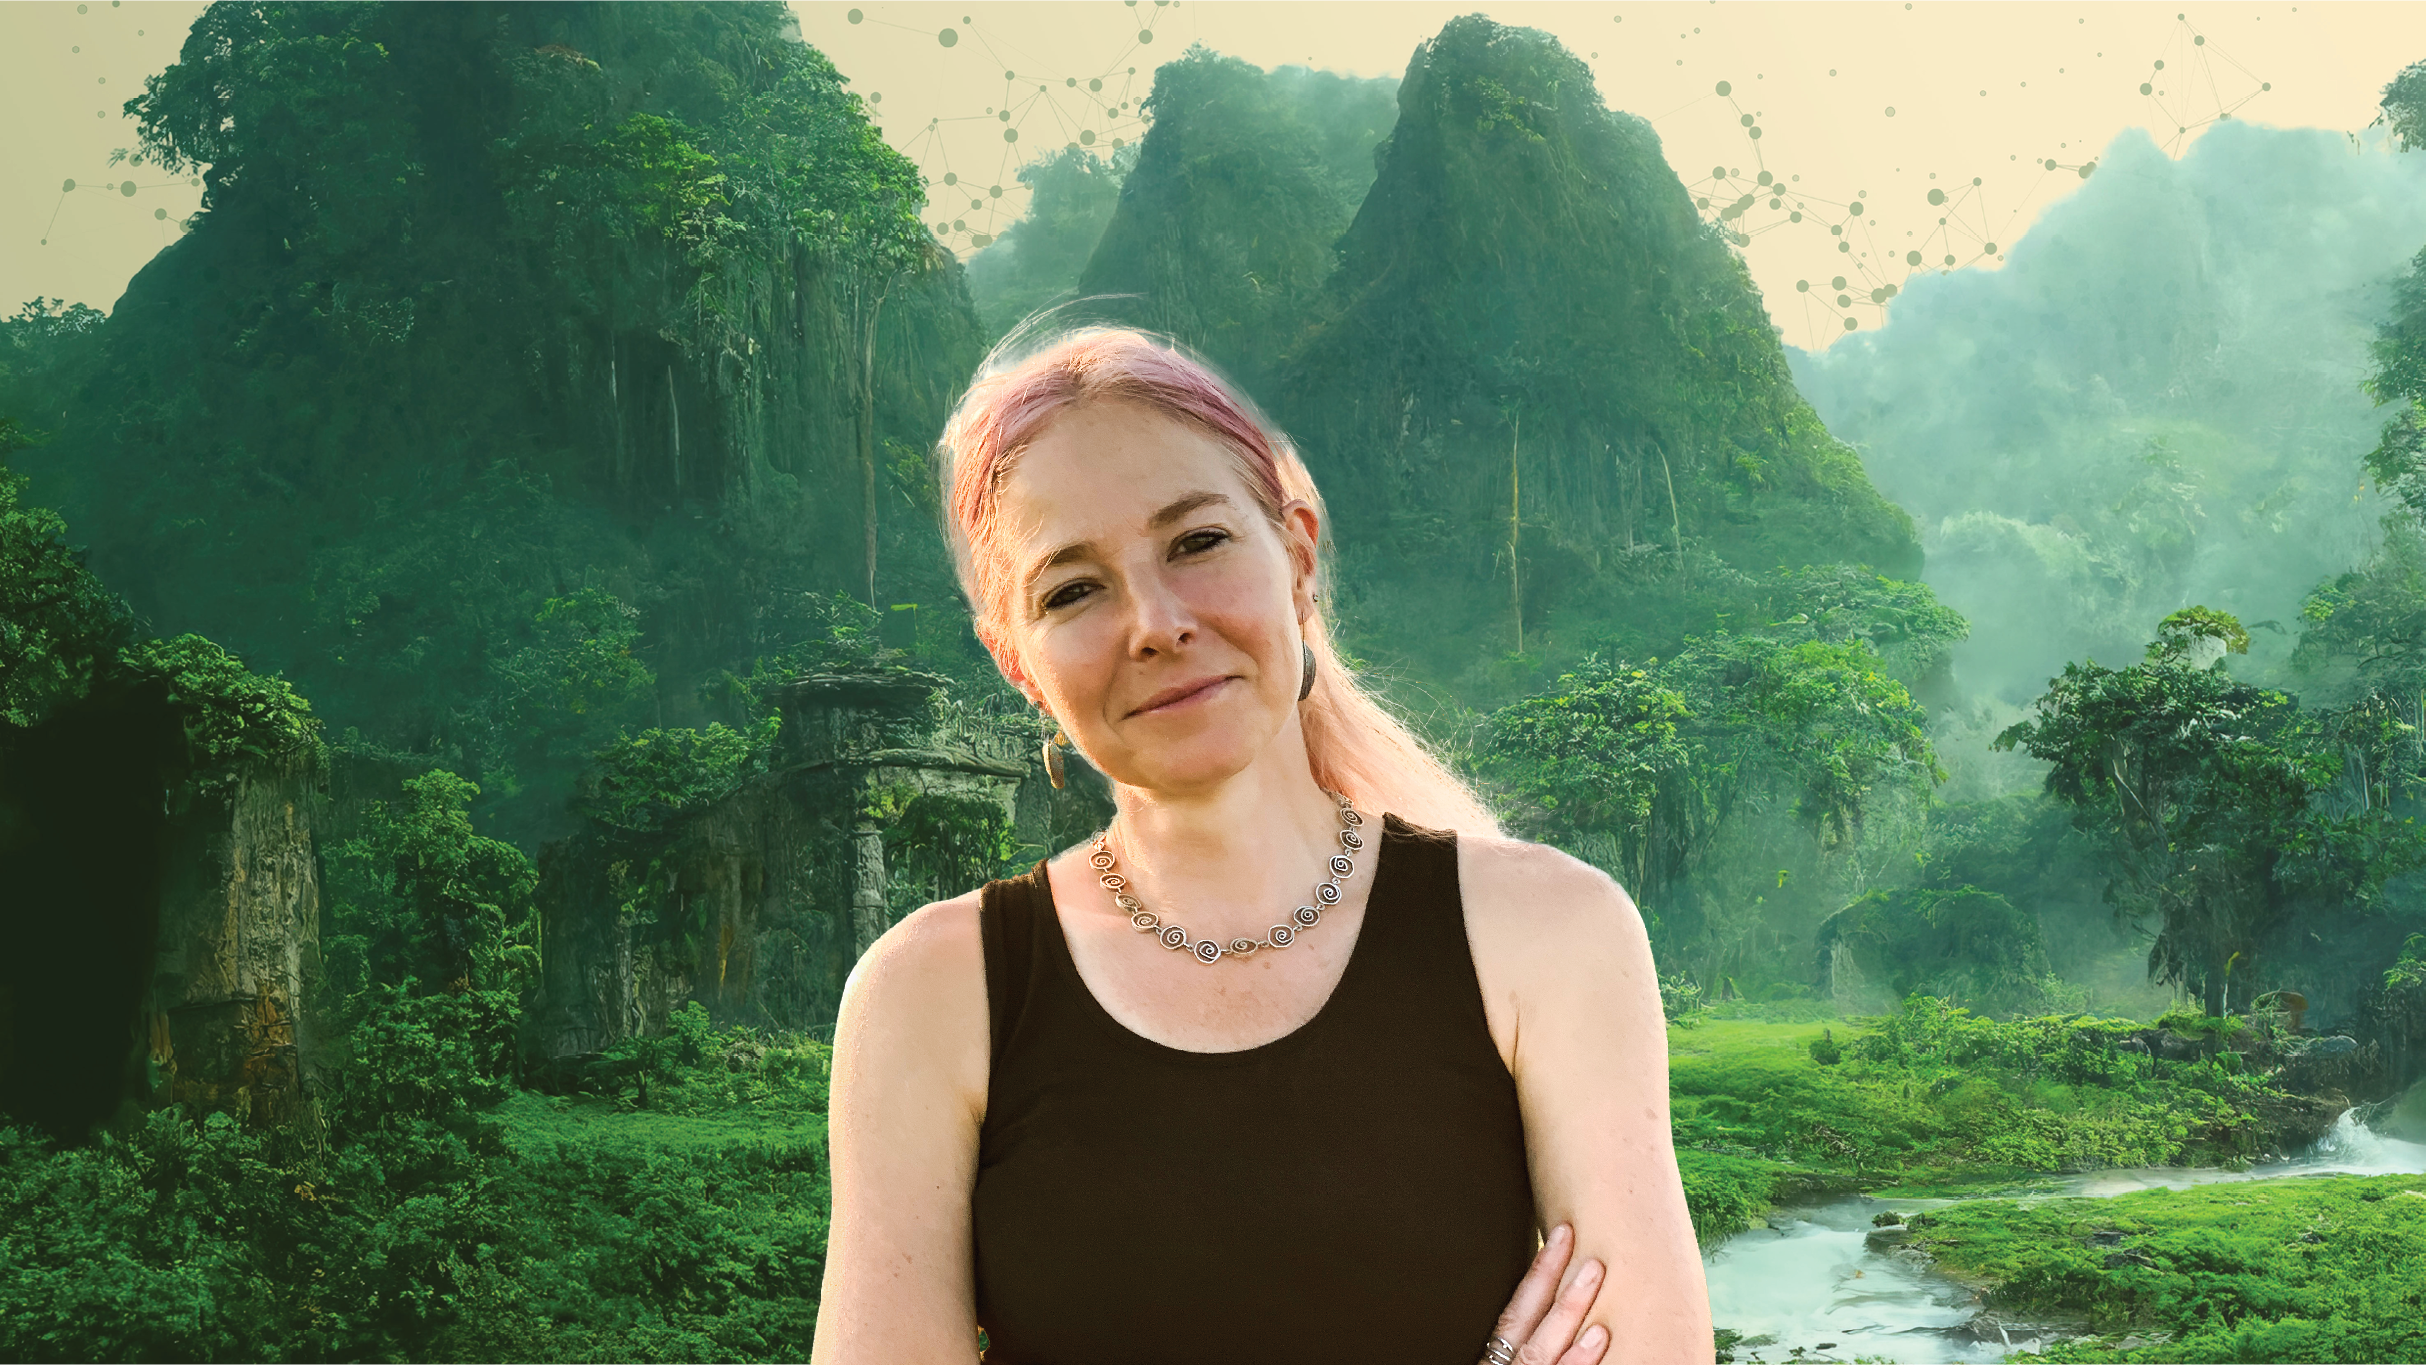 Prof Alice Roberts - From Cell to Civilisation in South Wharf promo photo for Exclusive presale offer code